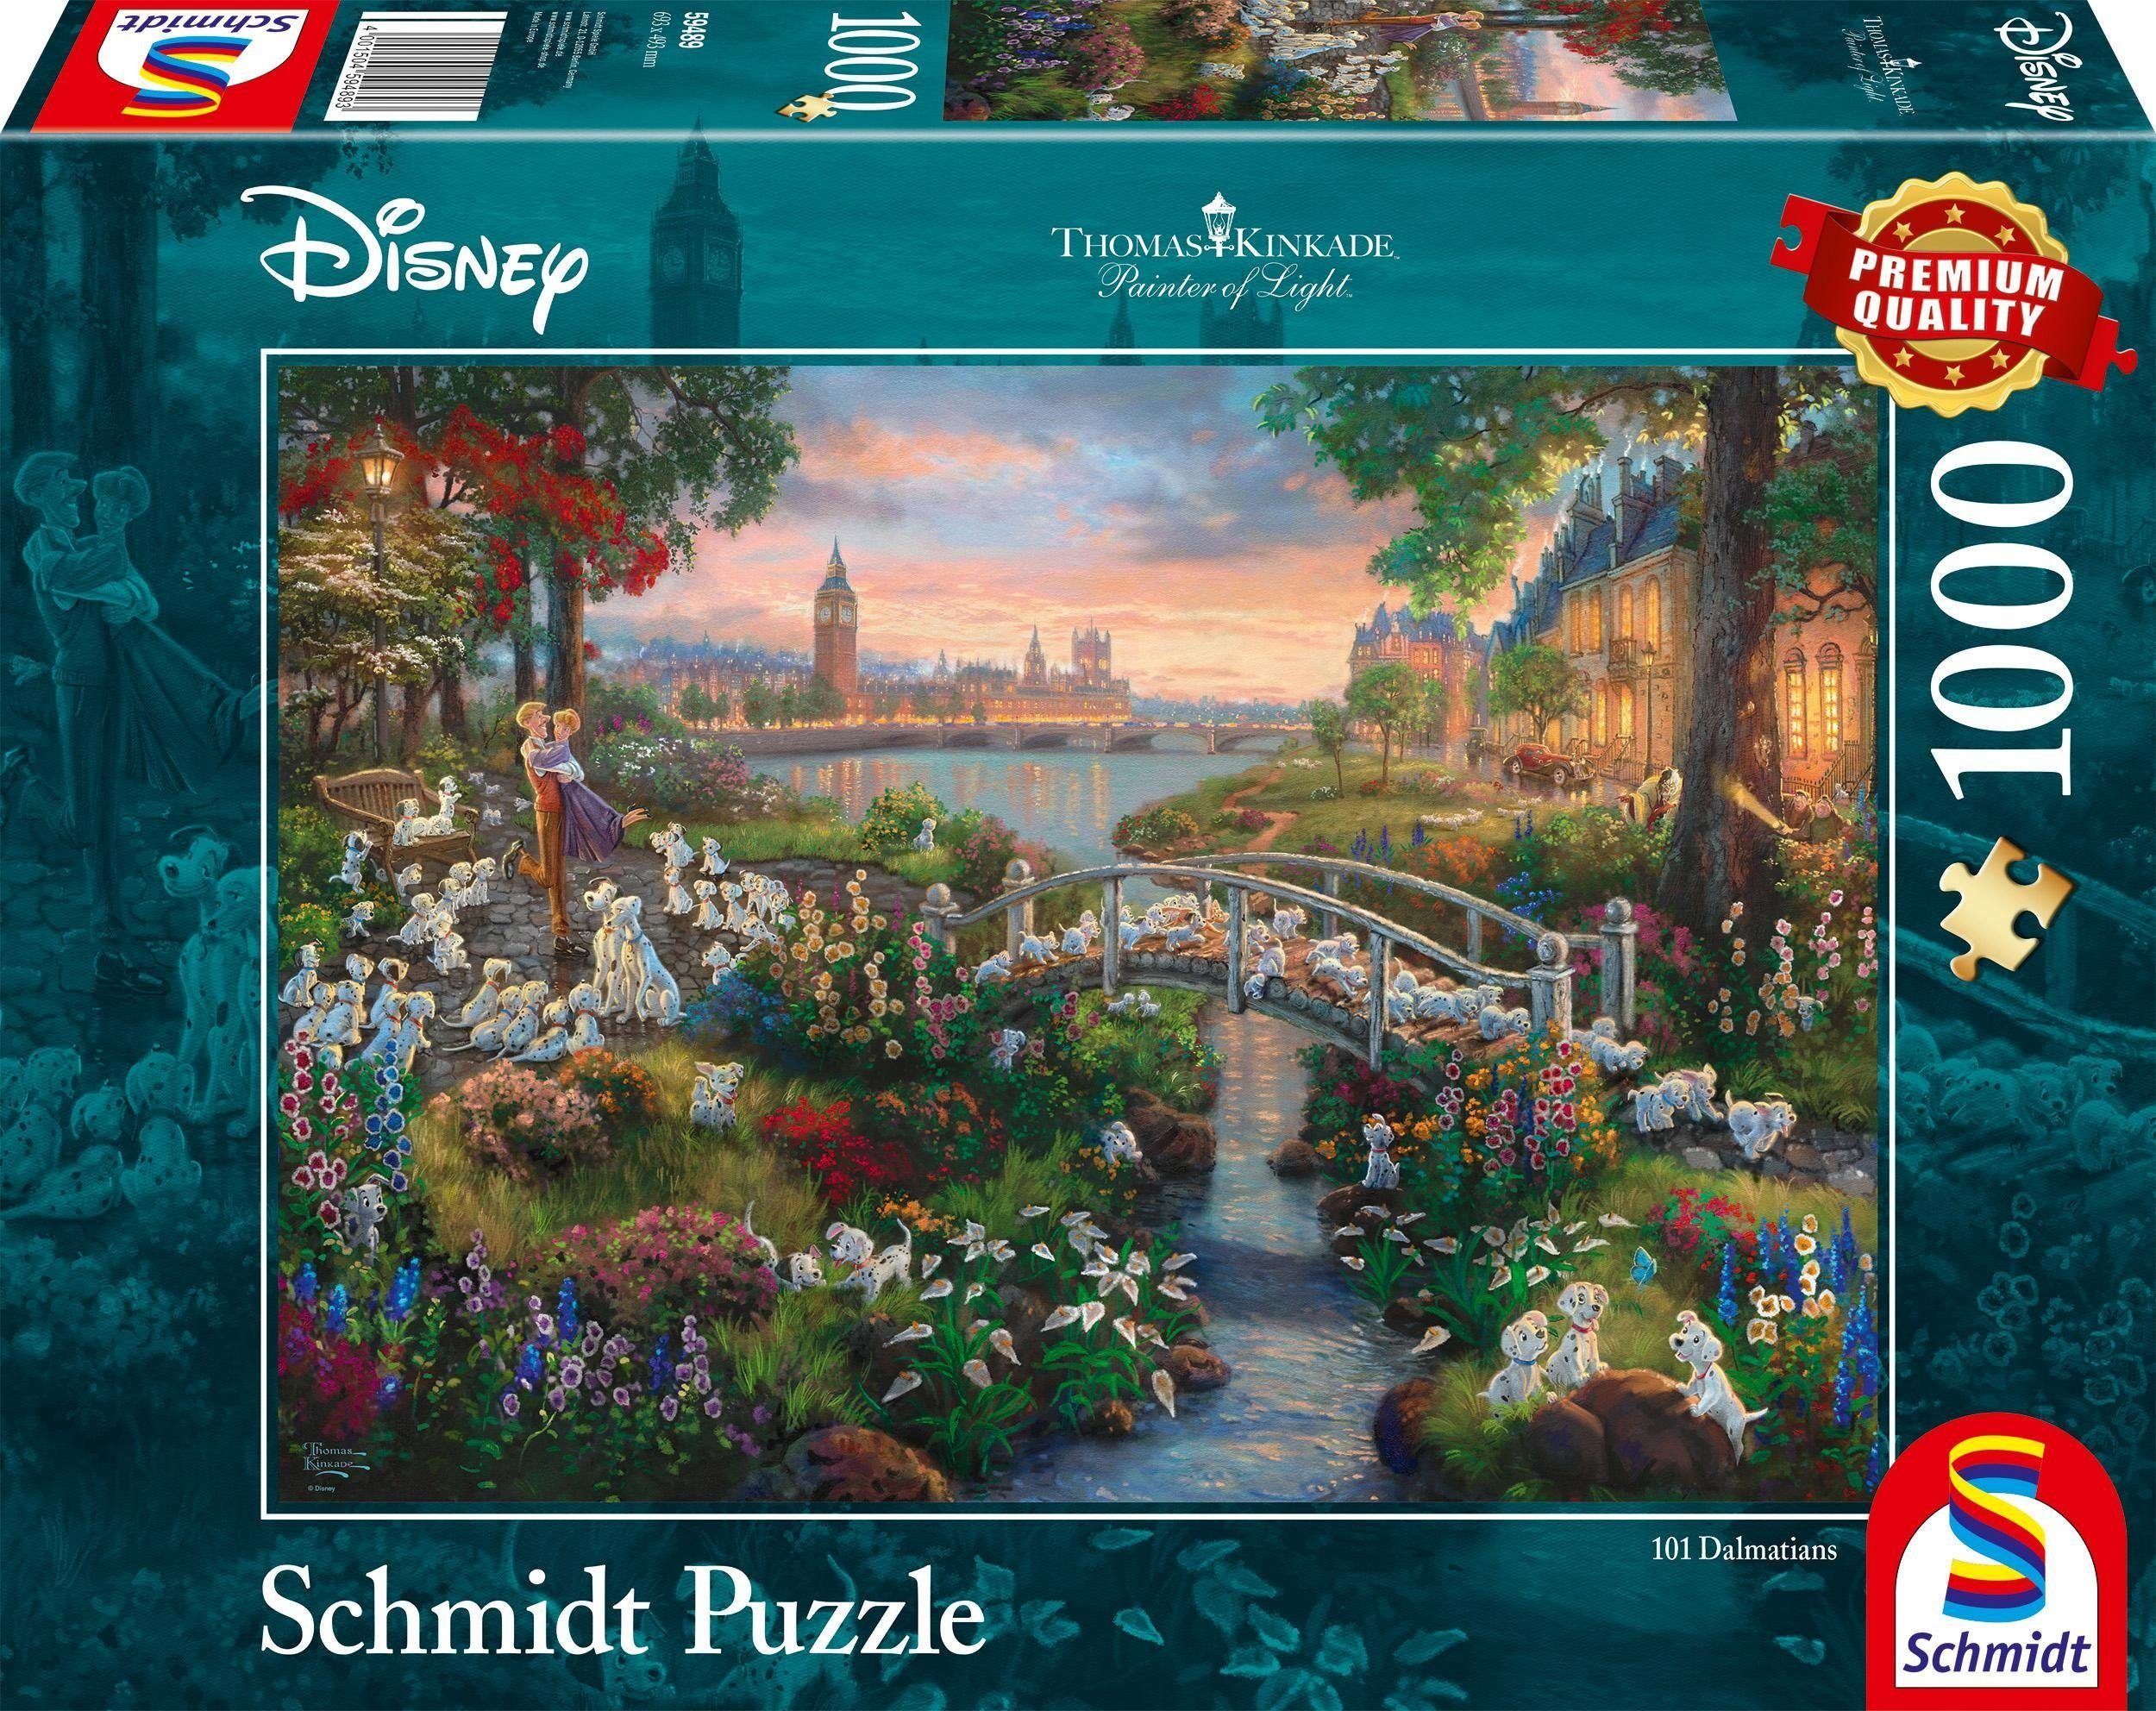 1000 Schmidt 101 Puzzleteile, Spiele Germany Dalmatiner, Puzzle Disney, in Made